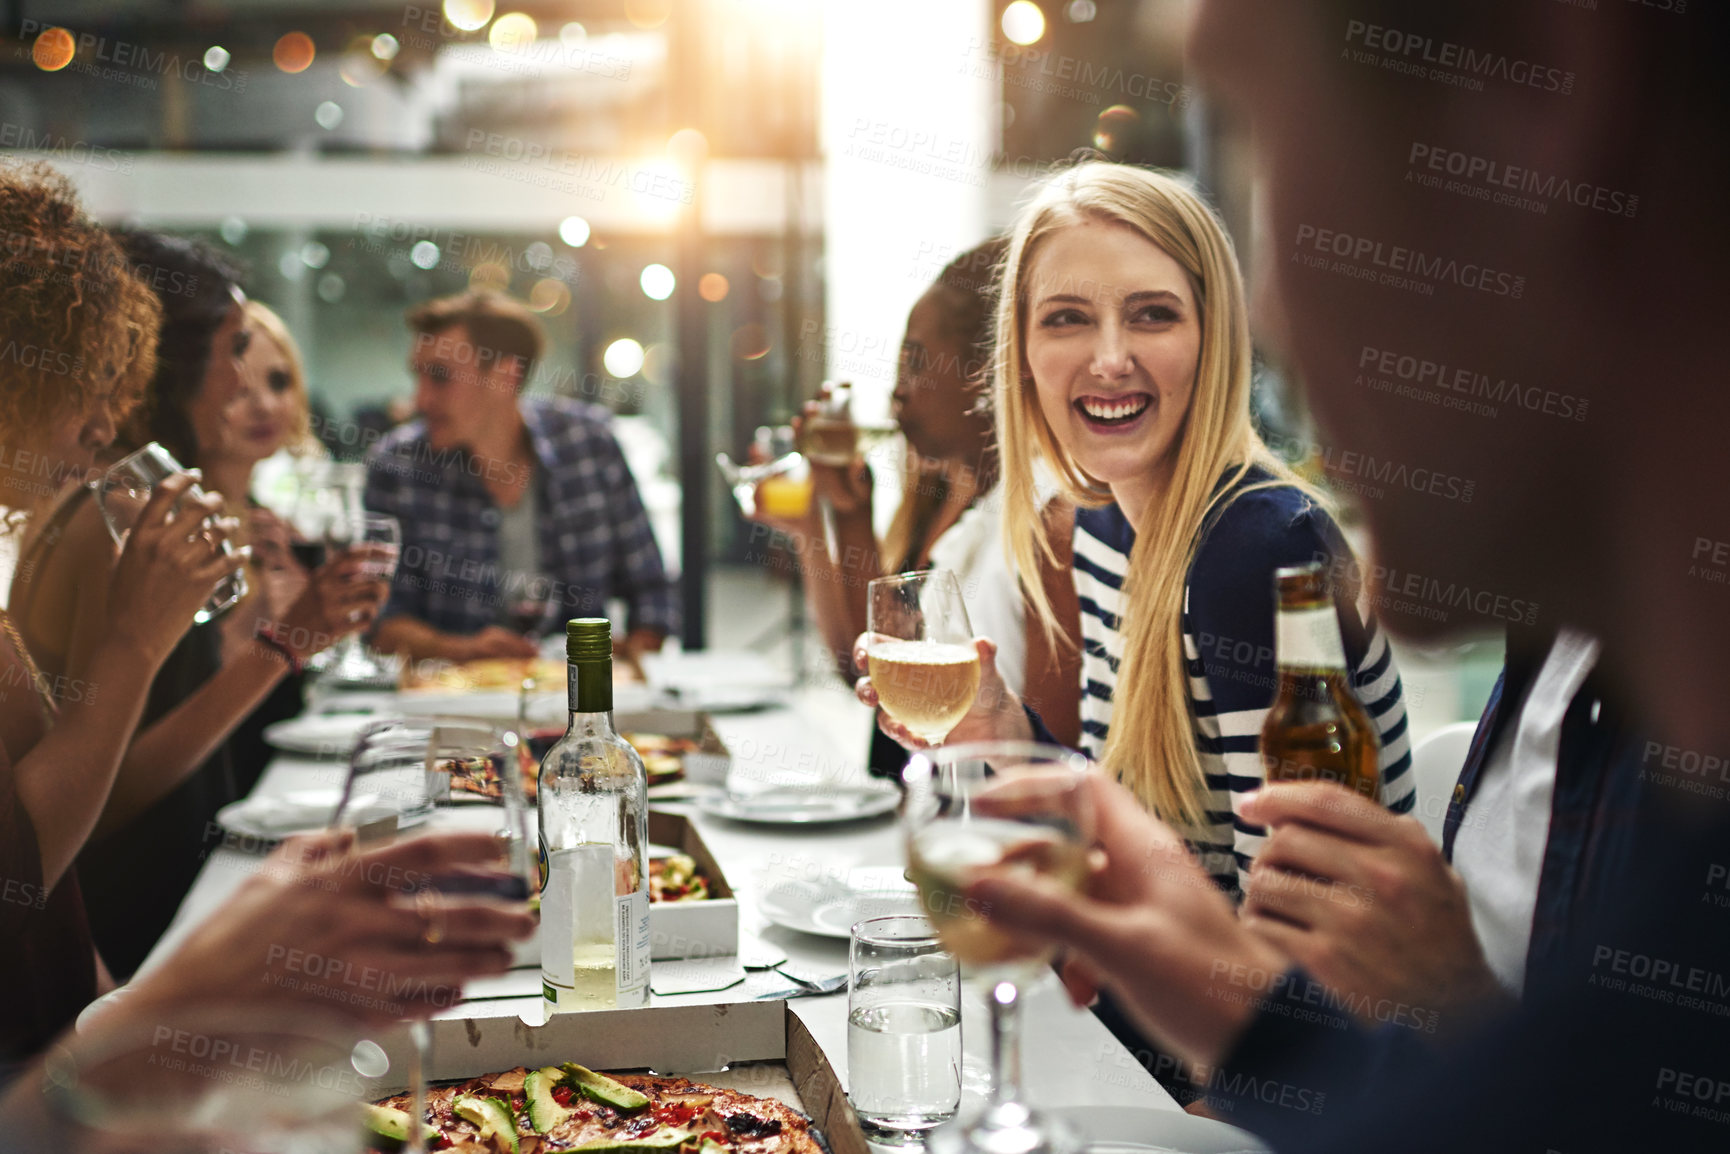 Buy stock photo Pizza, friends and happy restaurant party for dinner hangout, celebration and wellness. Reunion, happiness and interracial friendship of people enjoying pizzeria food and wine together.

